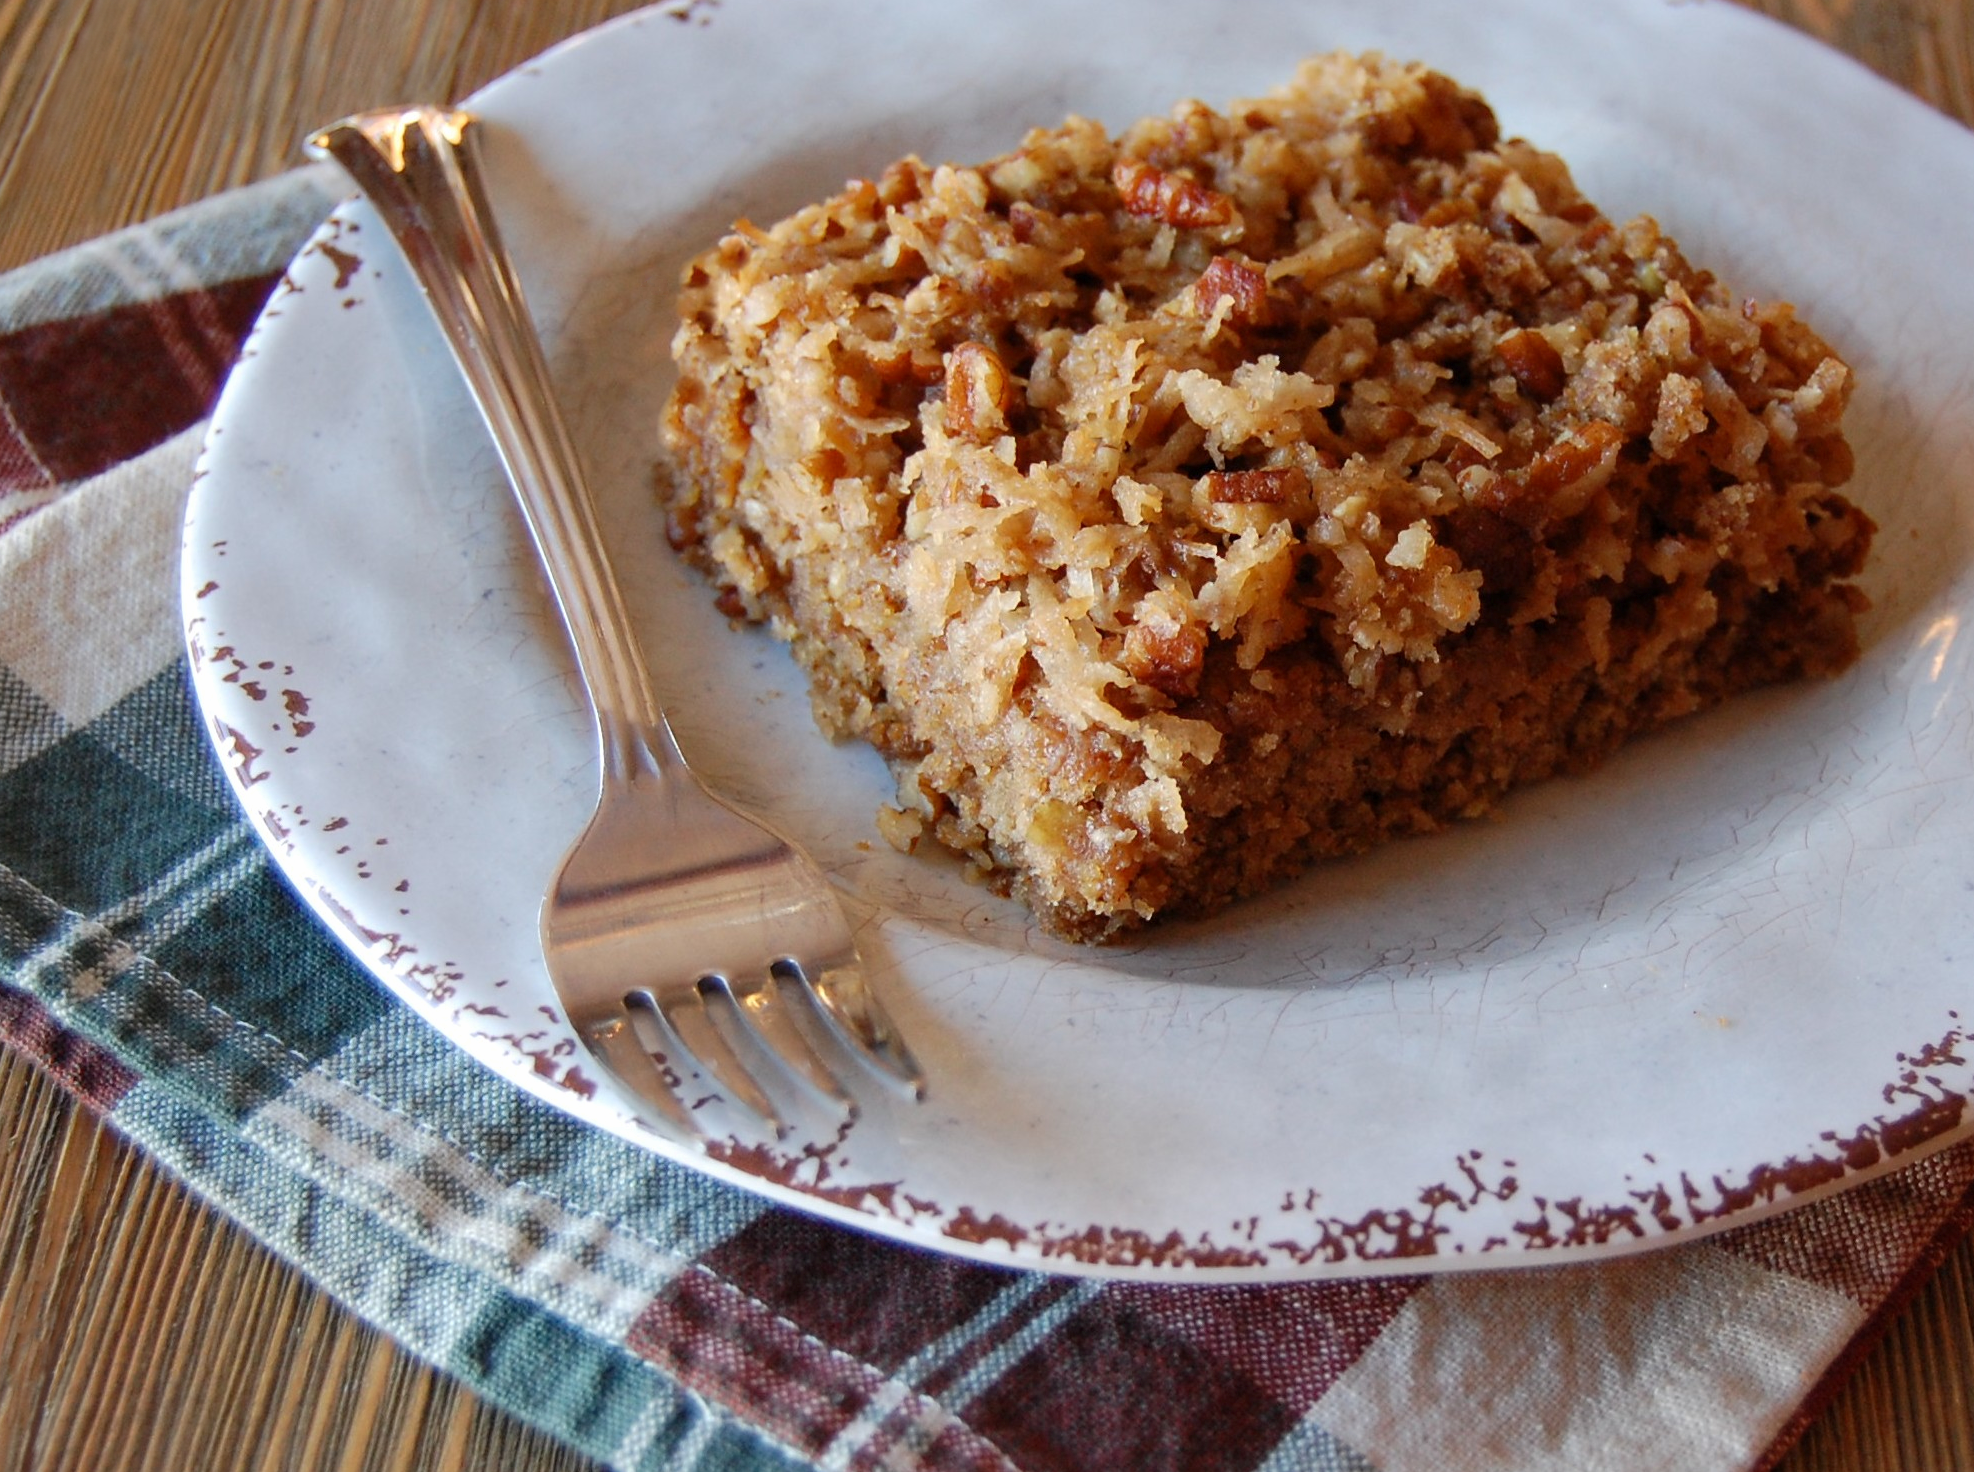 Spiced Apple Baked Oatmeal - The Secret Ingredient